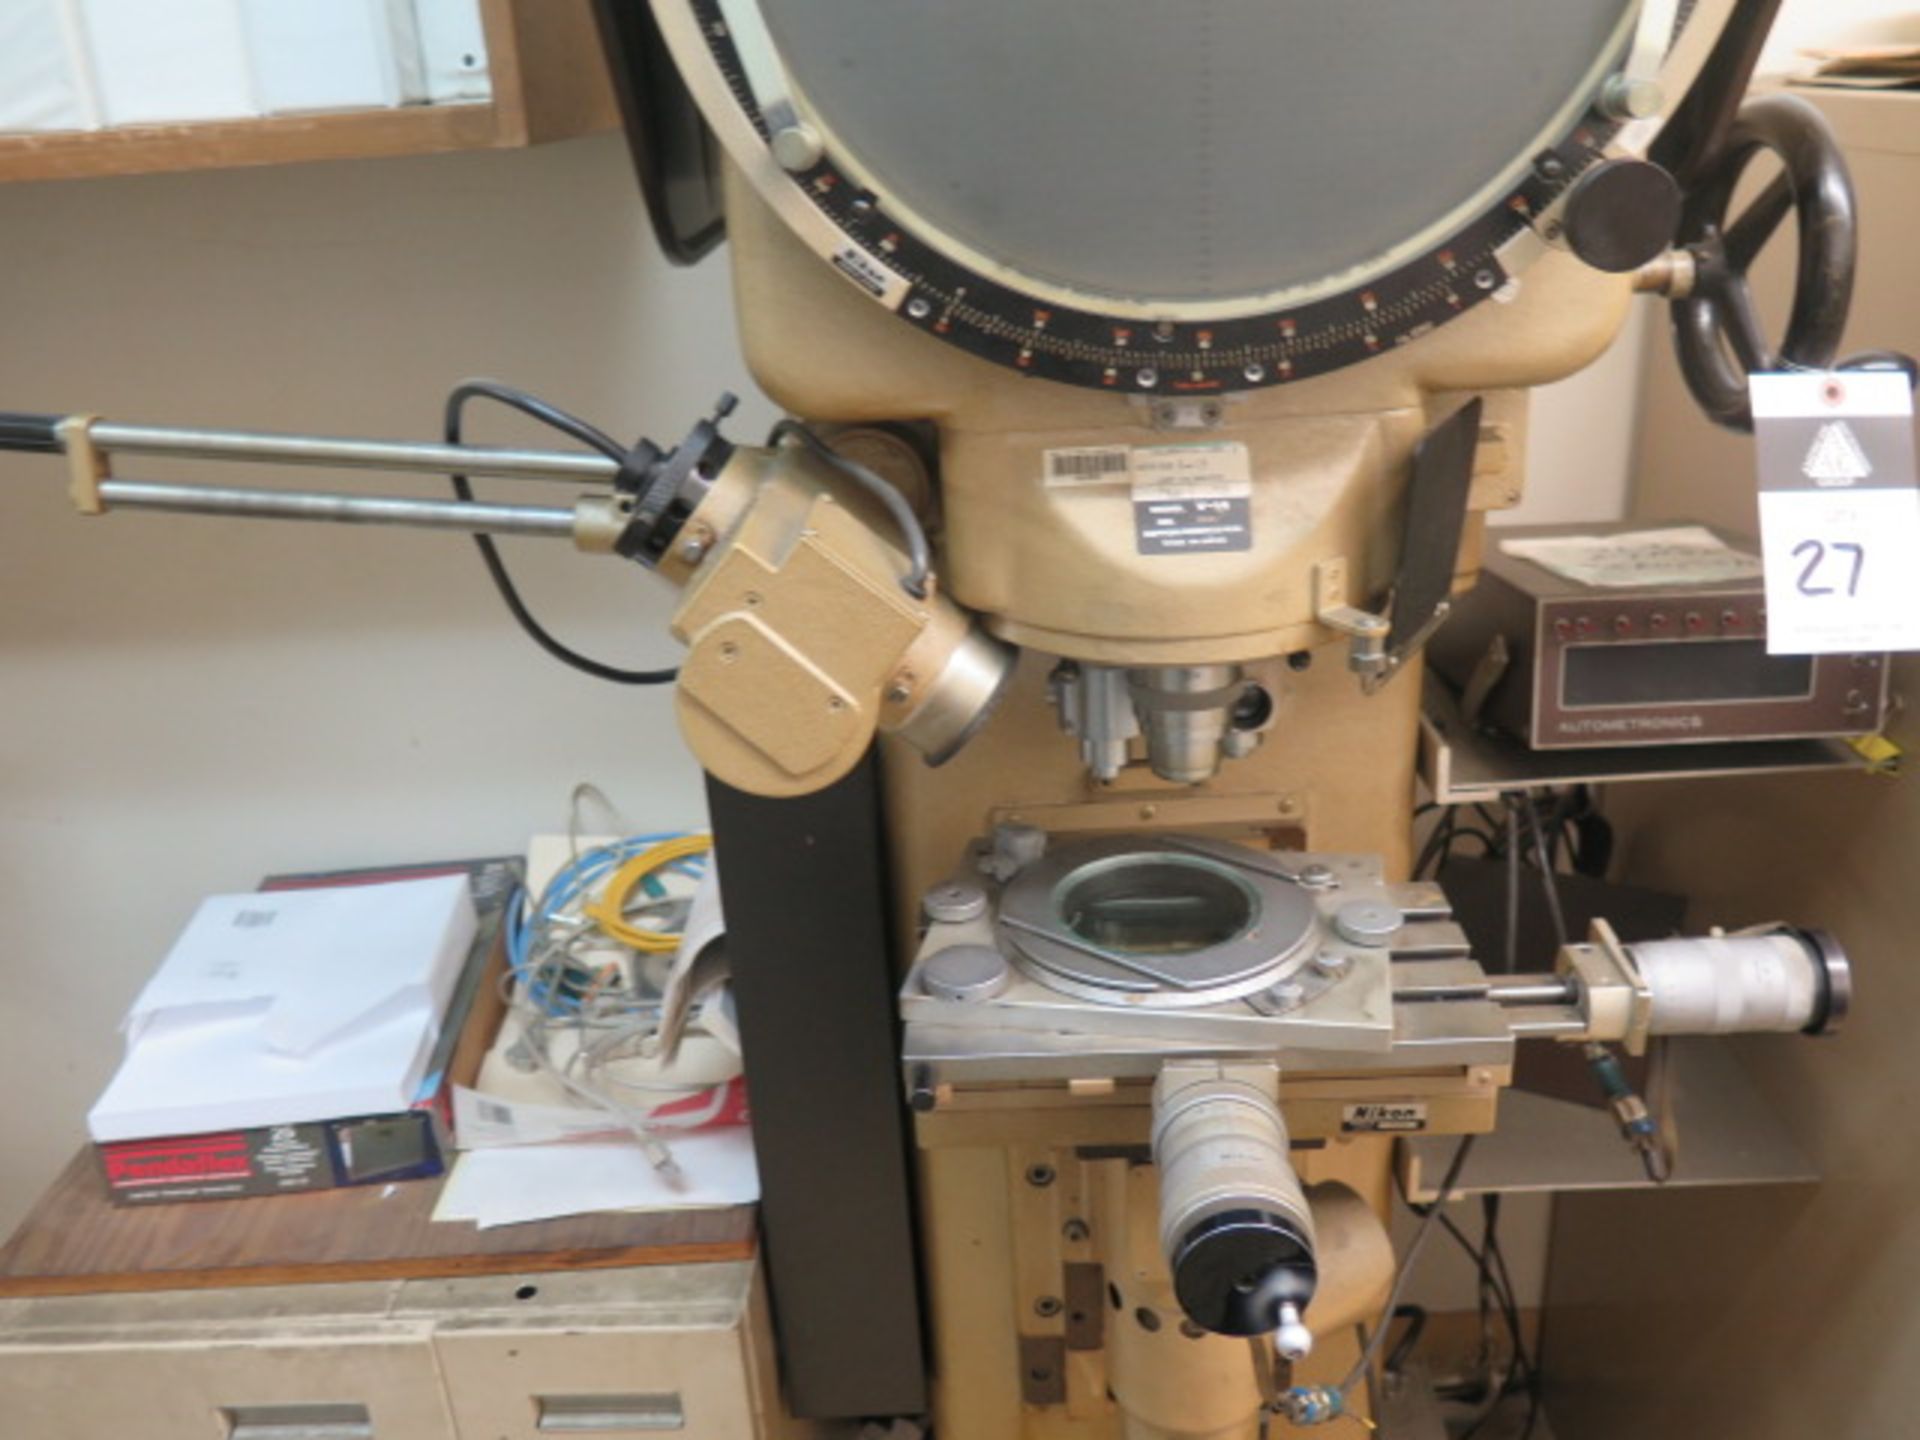 Nikon mdl. V-14 14" Optical Comparator s/n 36698 w/ Autometronics DRO, 20X, 50X and 300X, SOLD AS IS - Image 5 of 13